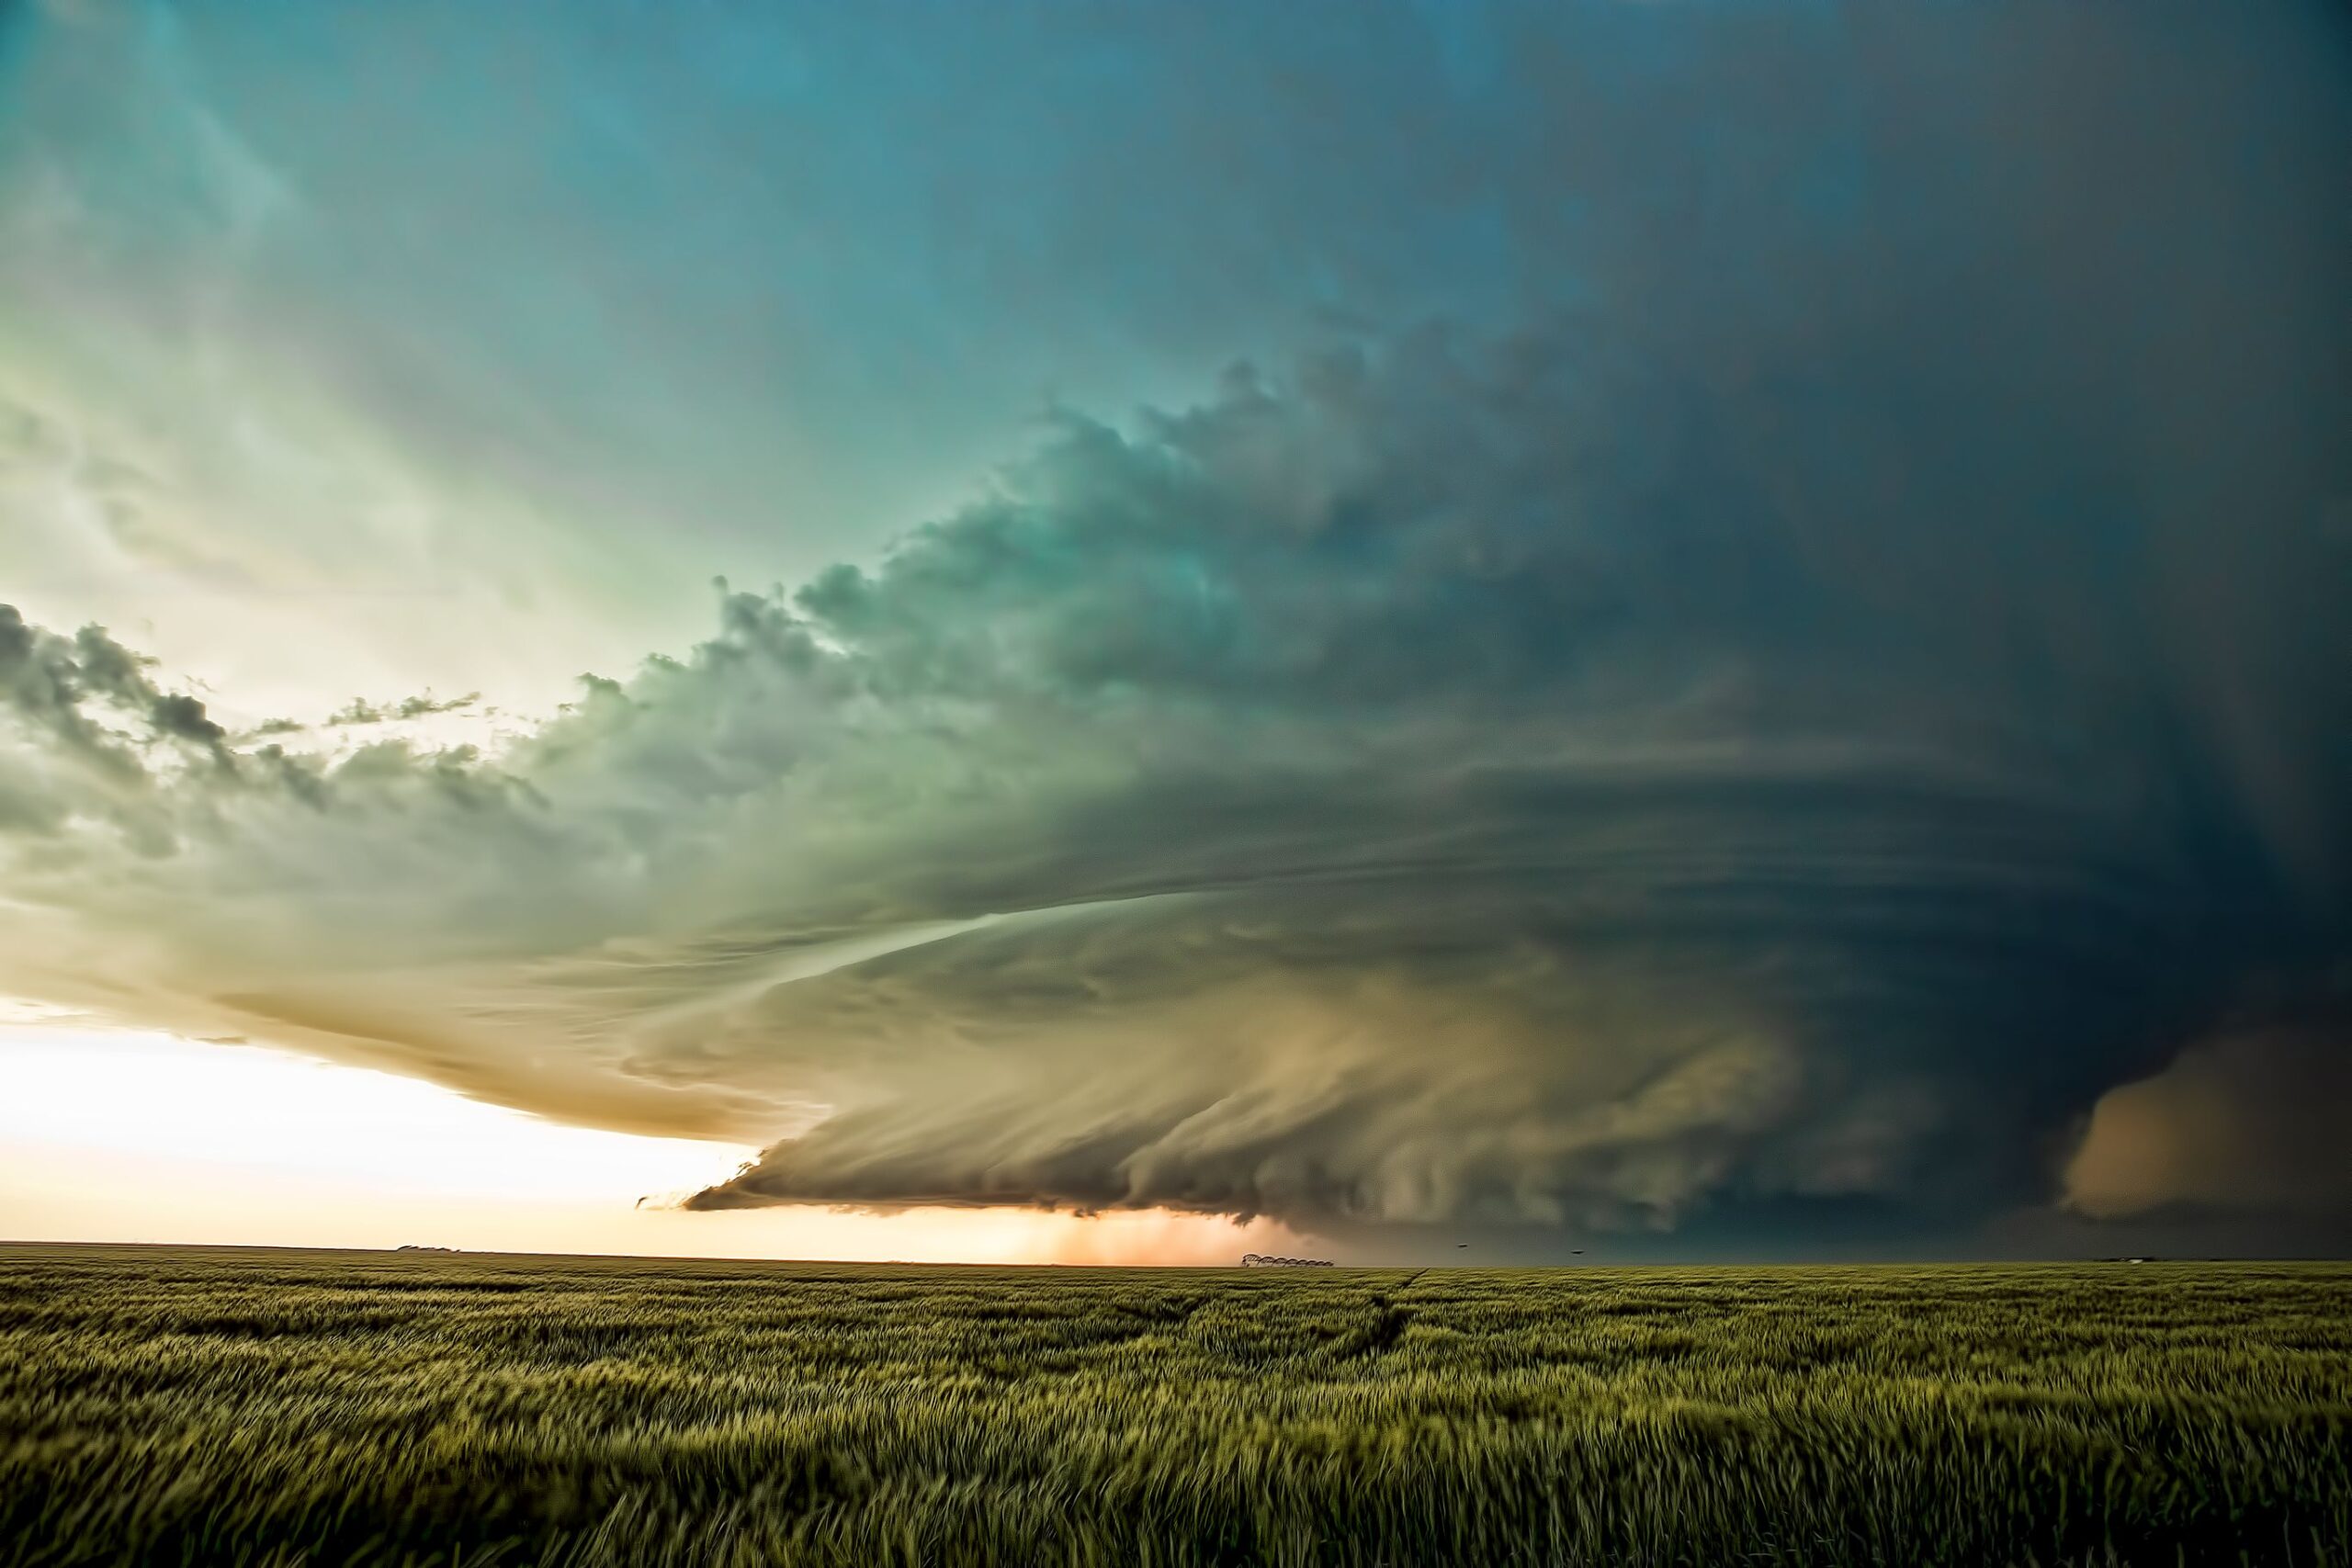 A supercell thunderstorm slowly moves across theHigh Plains of Wichita County Kansas